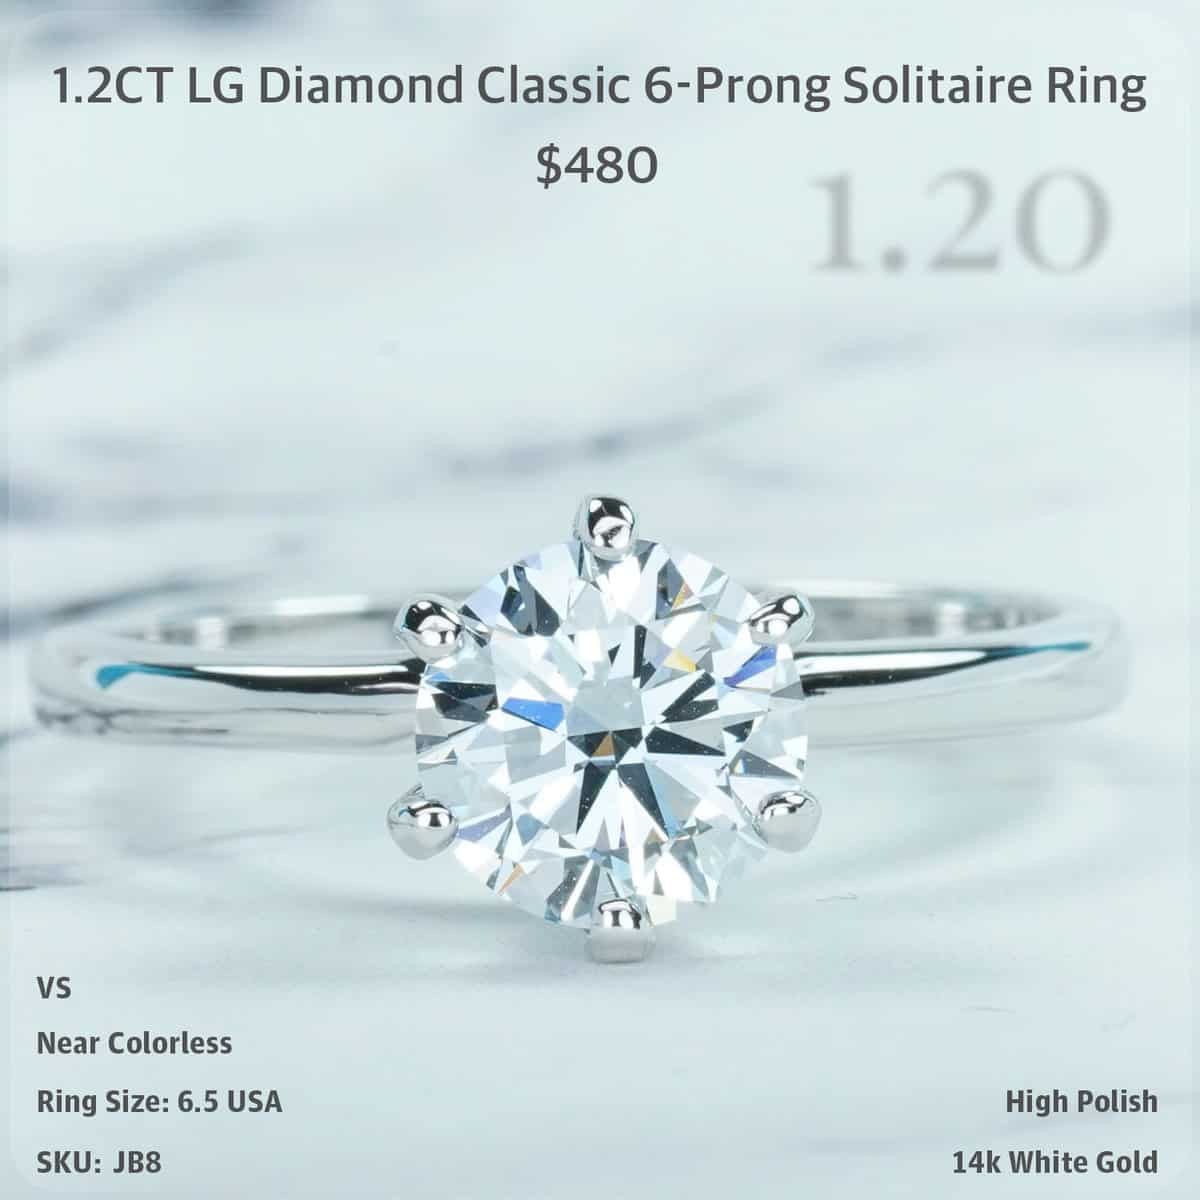 1.2CT LG Diamond Classic 6-Prong Solitaire Ring